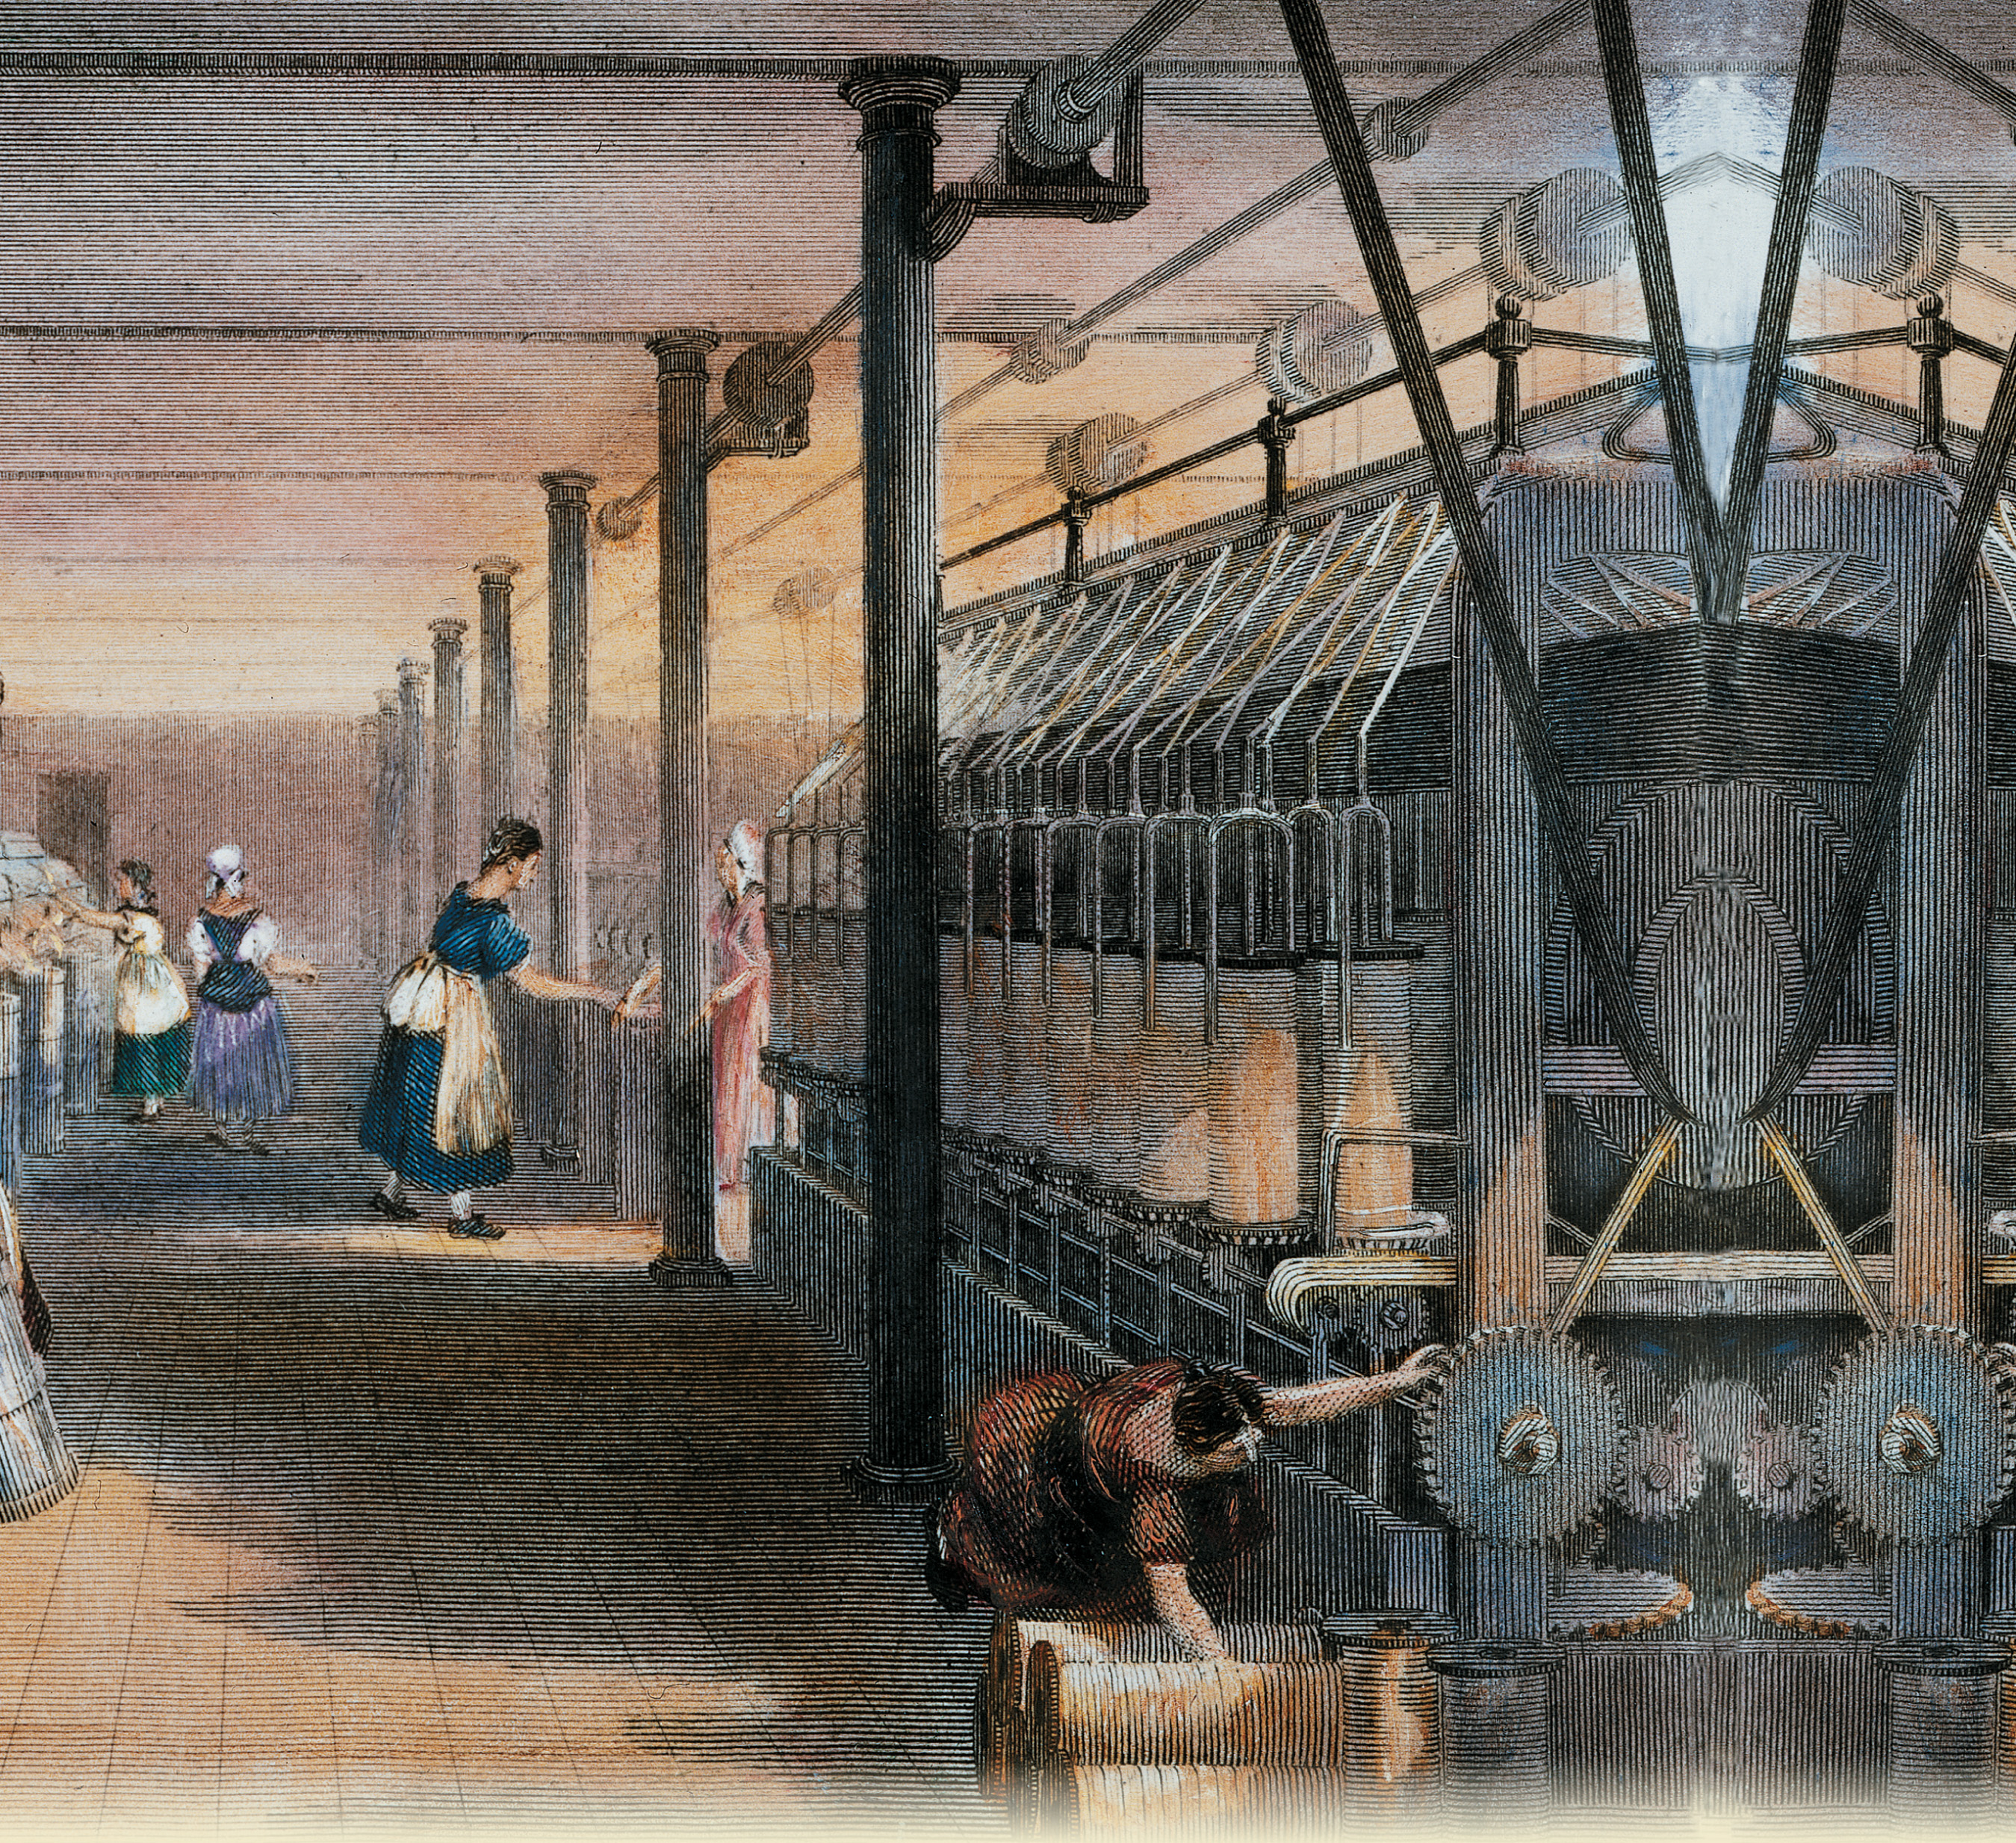 An emgraving shows women
working in a textille factory.